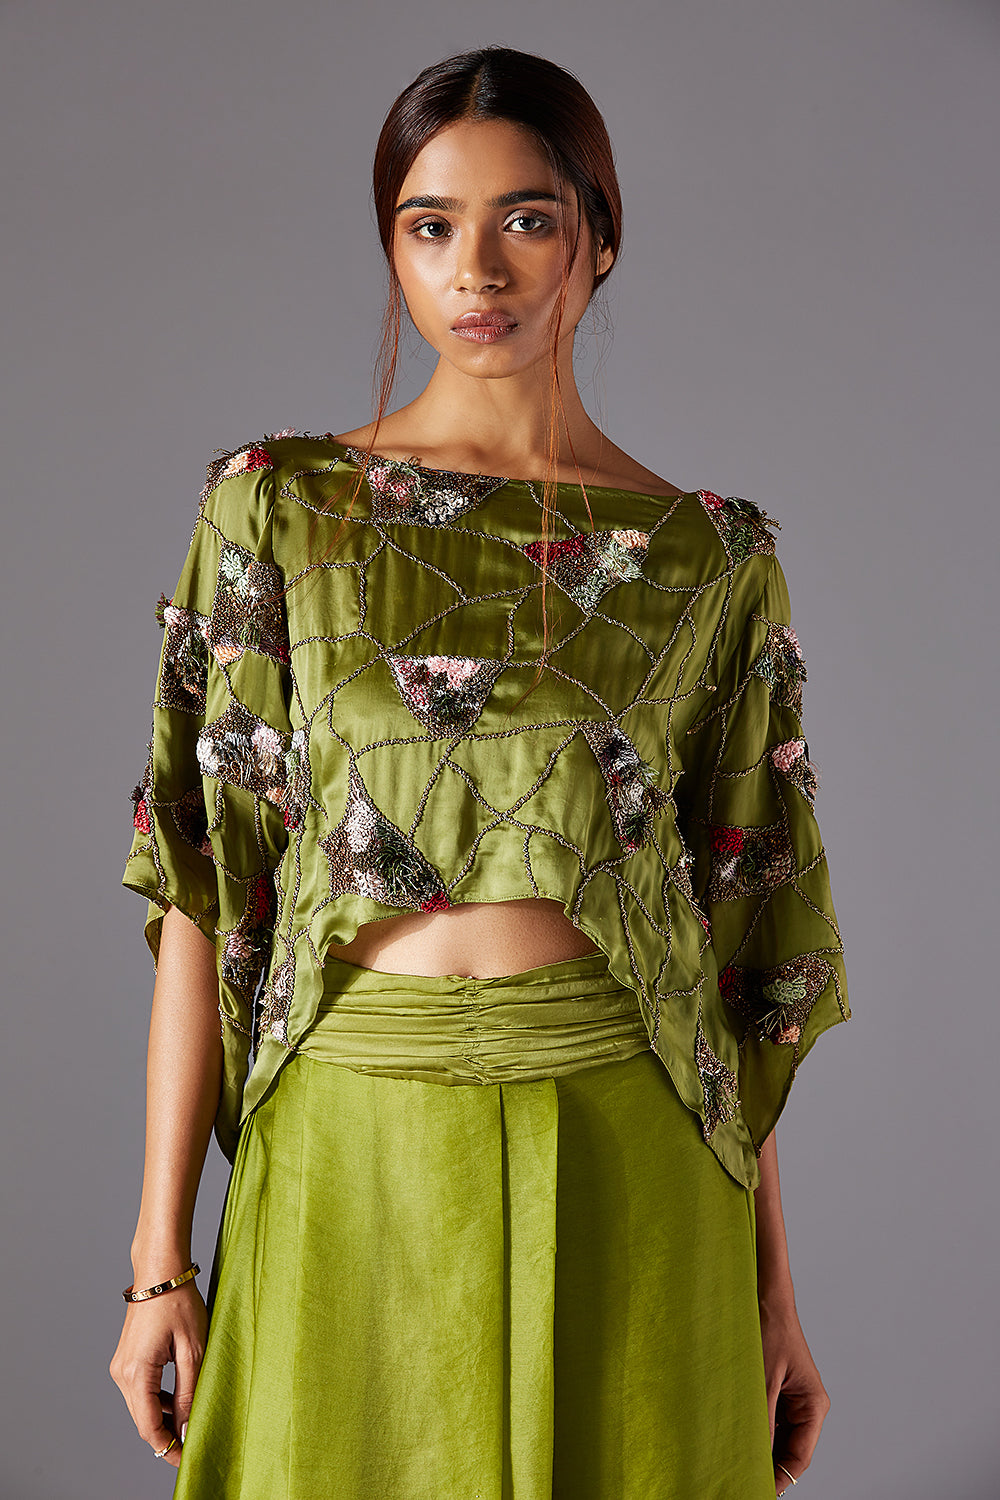 Shrubbery Crop Top With Bubble Skirt.